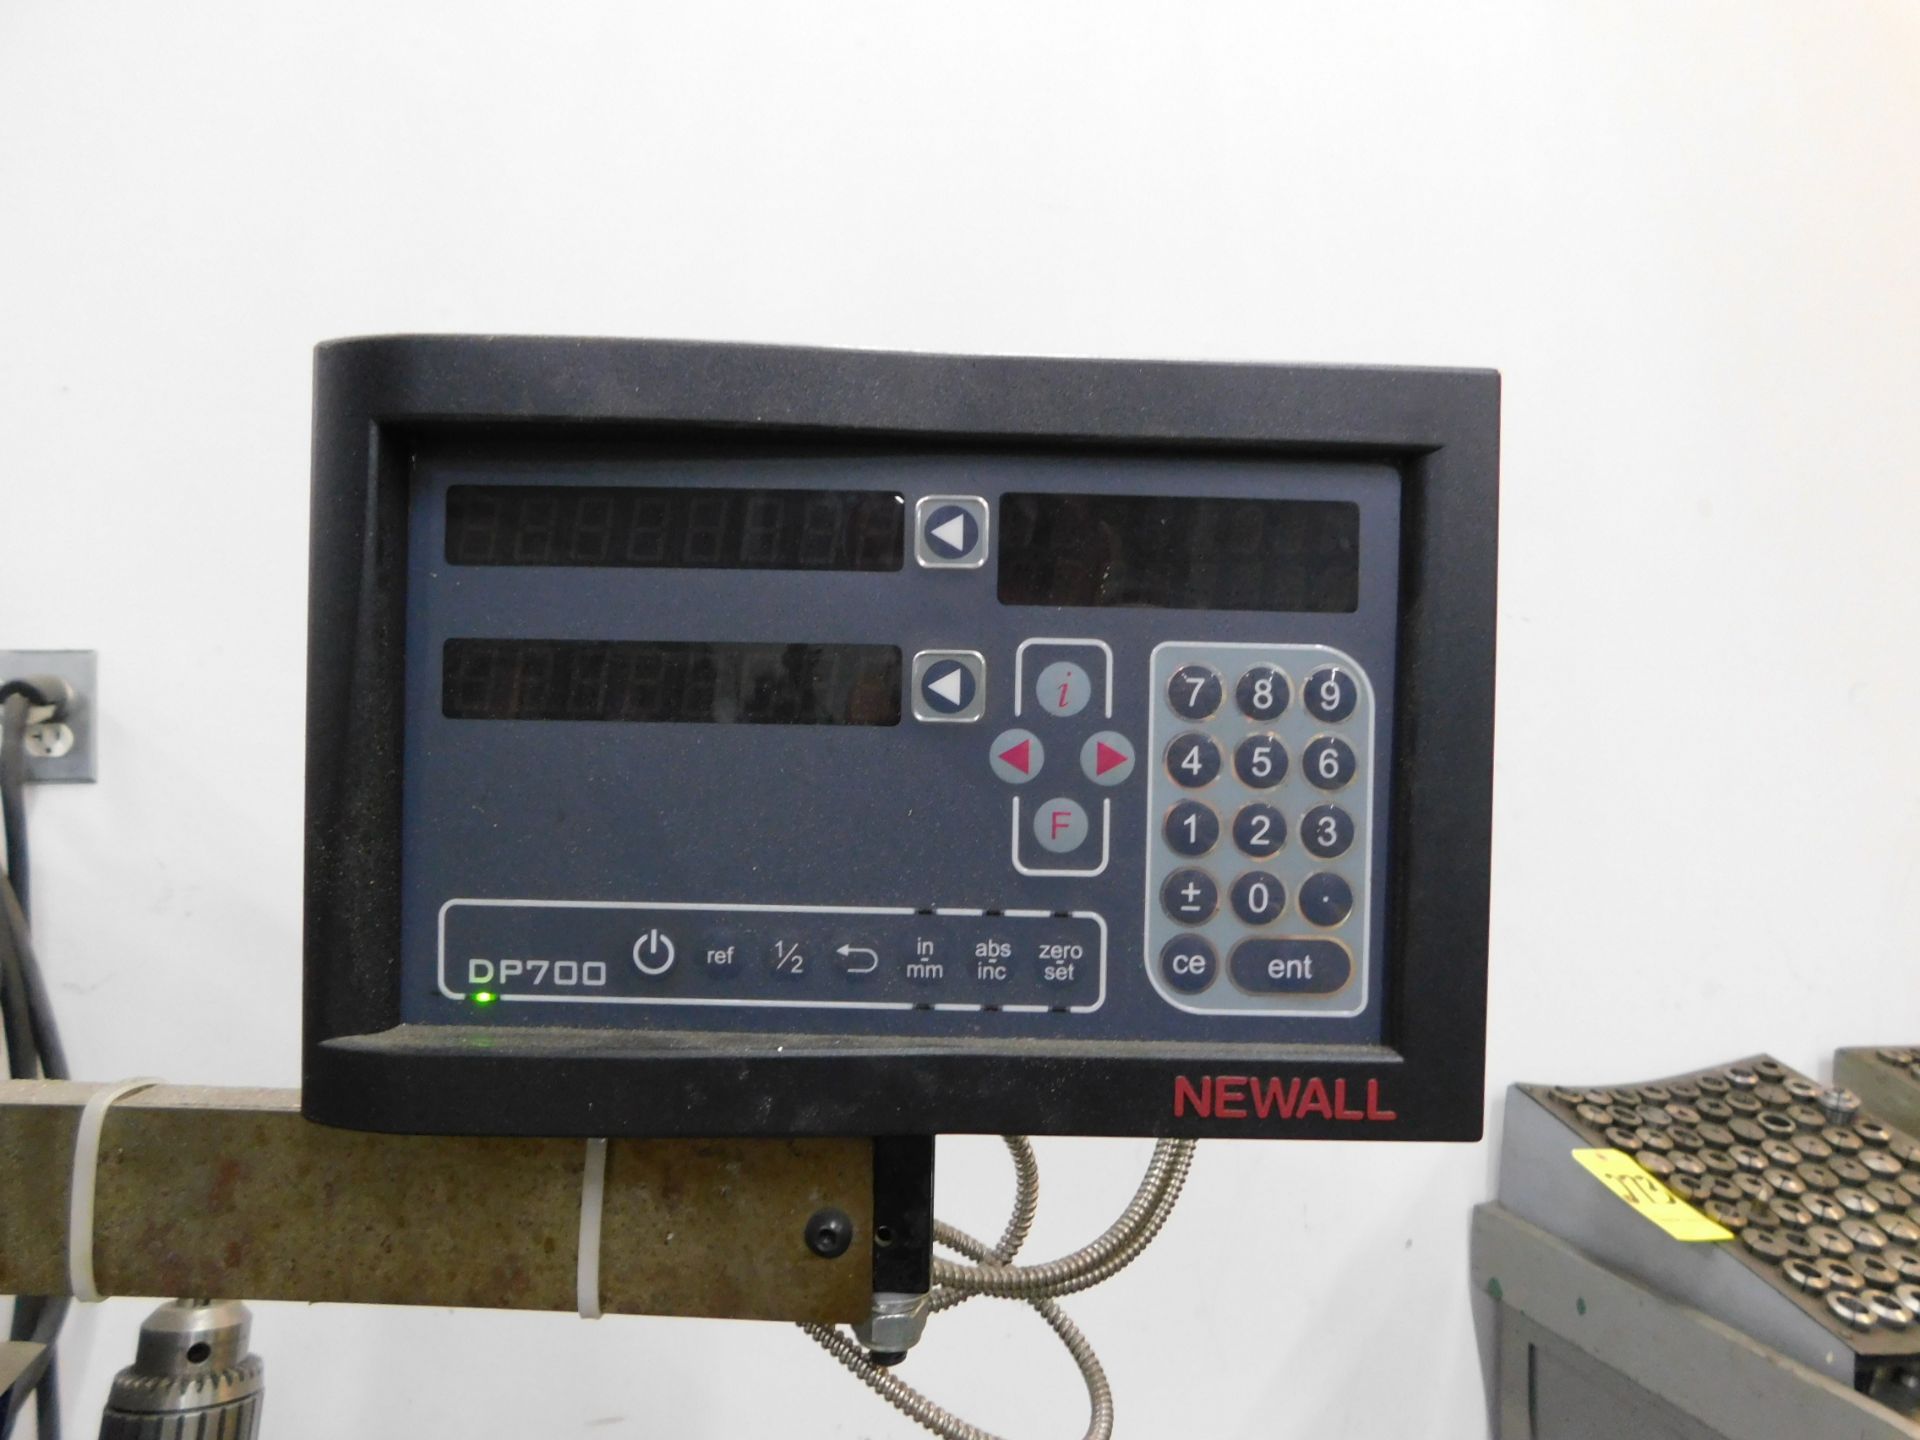 Seiki-XL Vertical Mill, Model 3VX, s/n 8225, 10” X 50” Table, Newall D.R.O., 3 HP, R-8 Spindle - Image 6 of 7